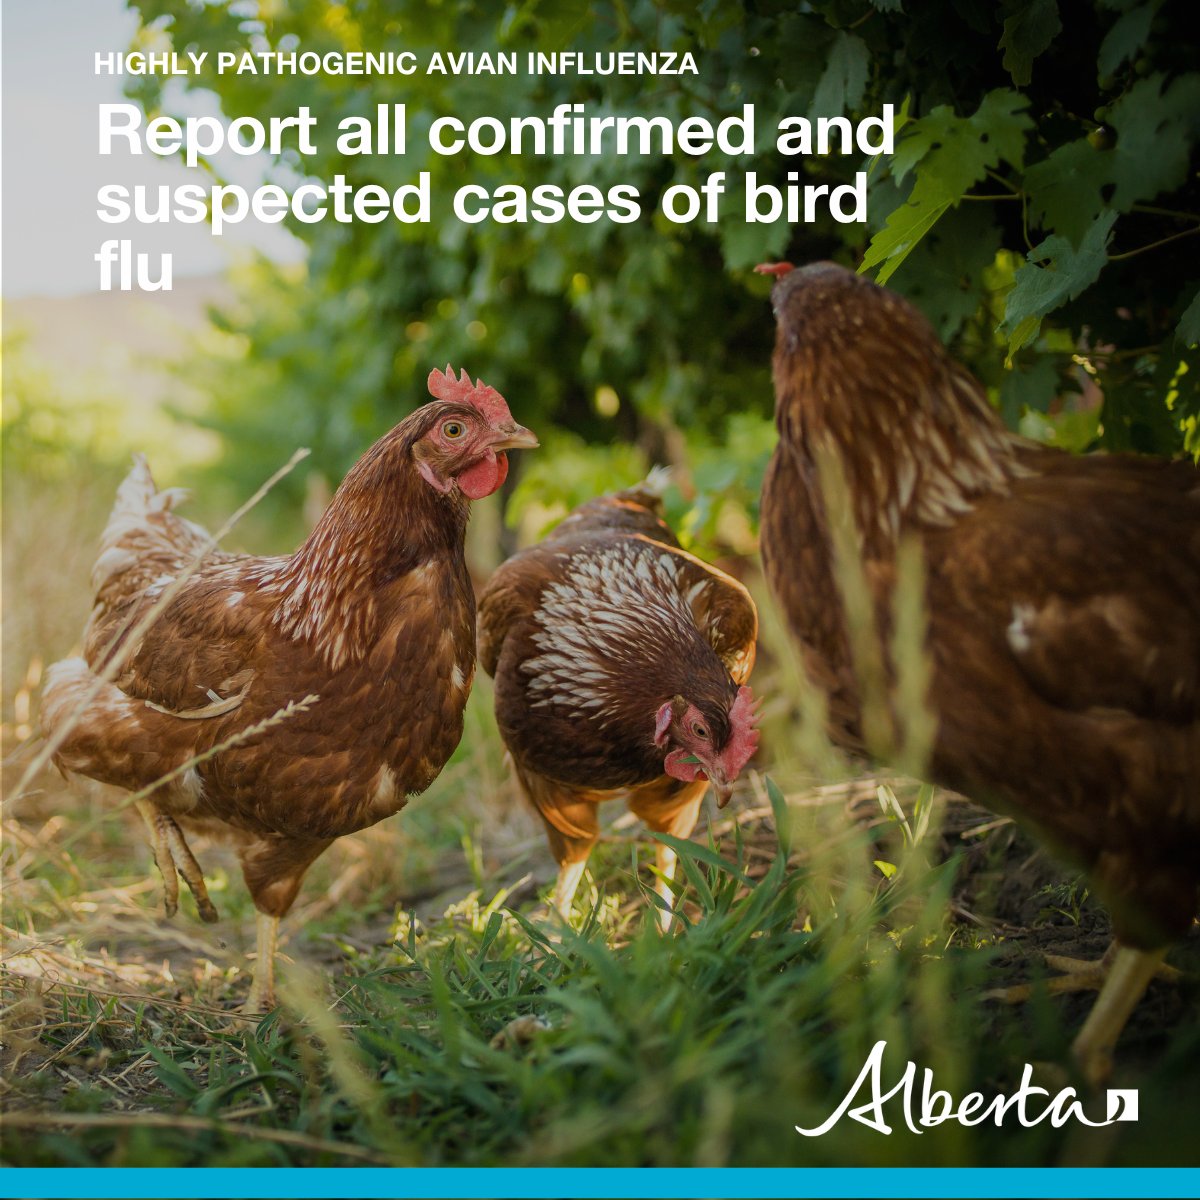 Highly Pathogenic Avian Influenza or ‘bird flu’ is a contagious virus affecting many bird populations. Suspected or confirmed cases must be reported to the Office of the Chief Provincial Veterinarian or @InspectionCan immediately. Learn more: alberta.ca/avian-influenz… #abag